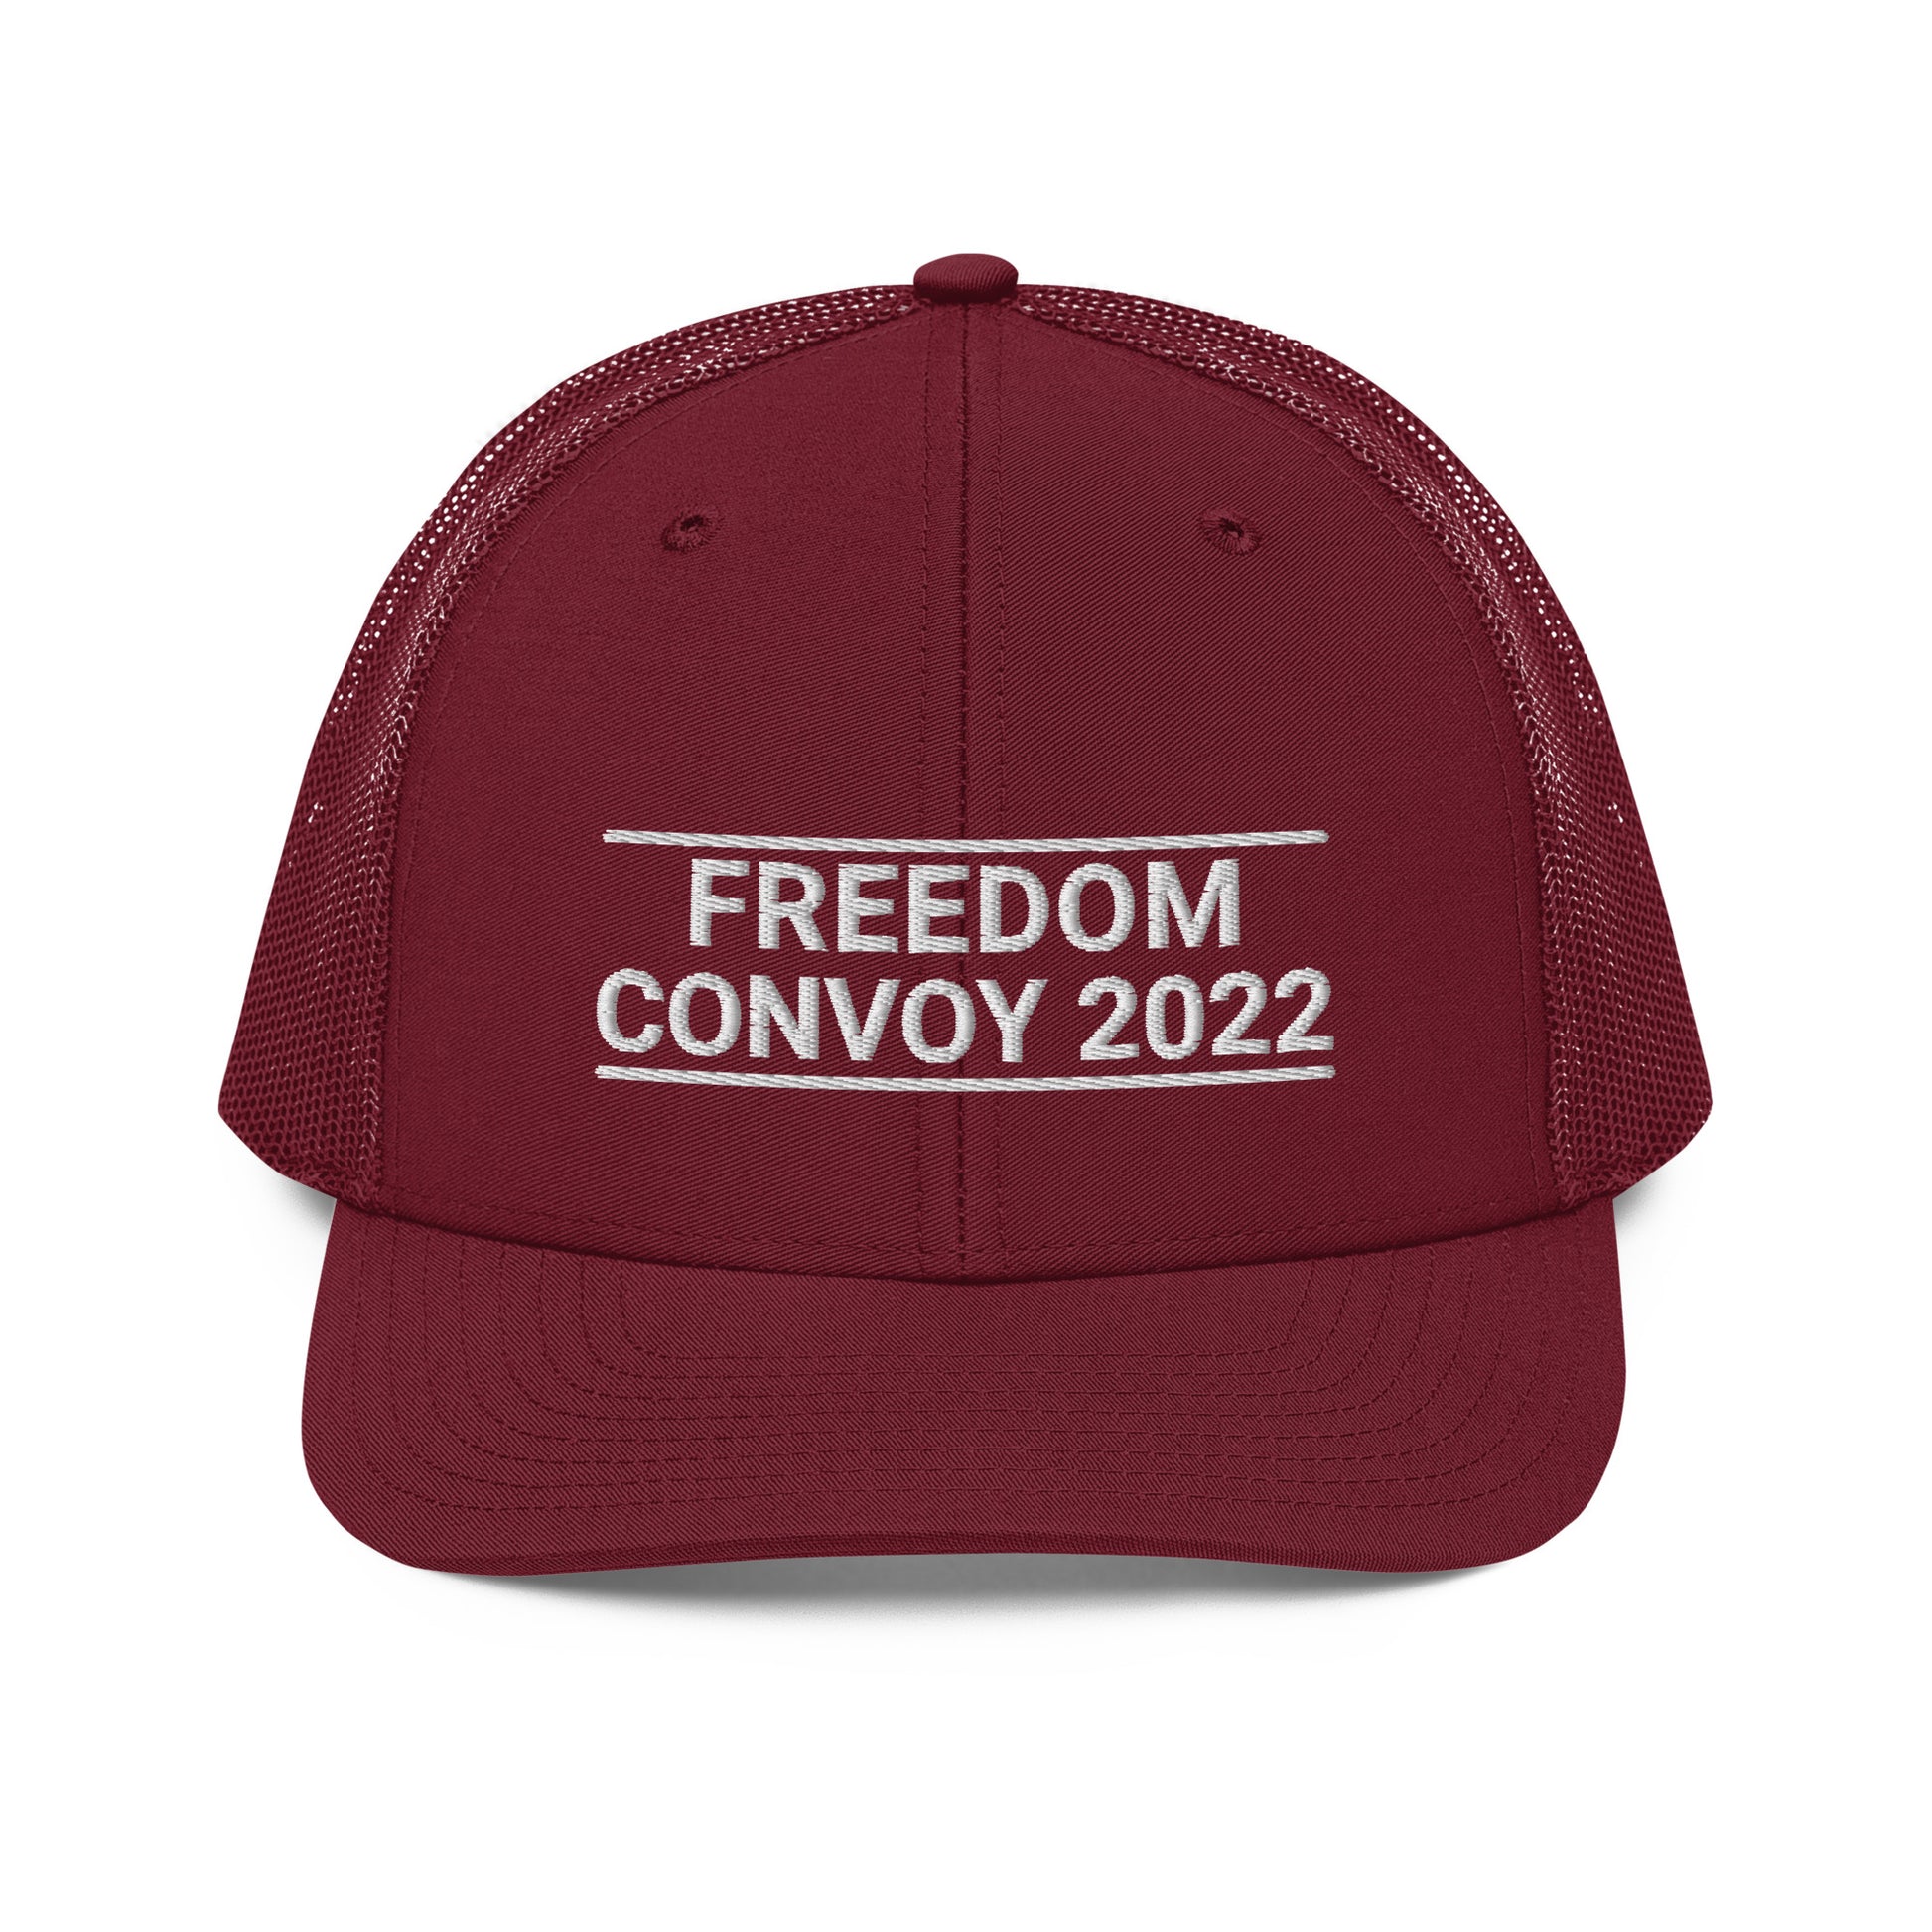 Freedom Convoy 2022 embroidered Richardson 1122 red hat.